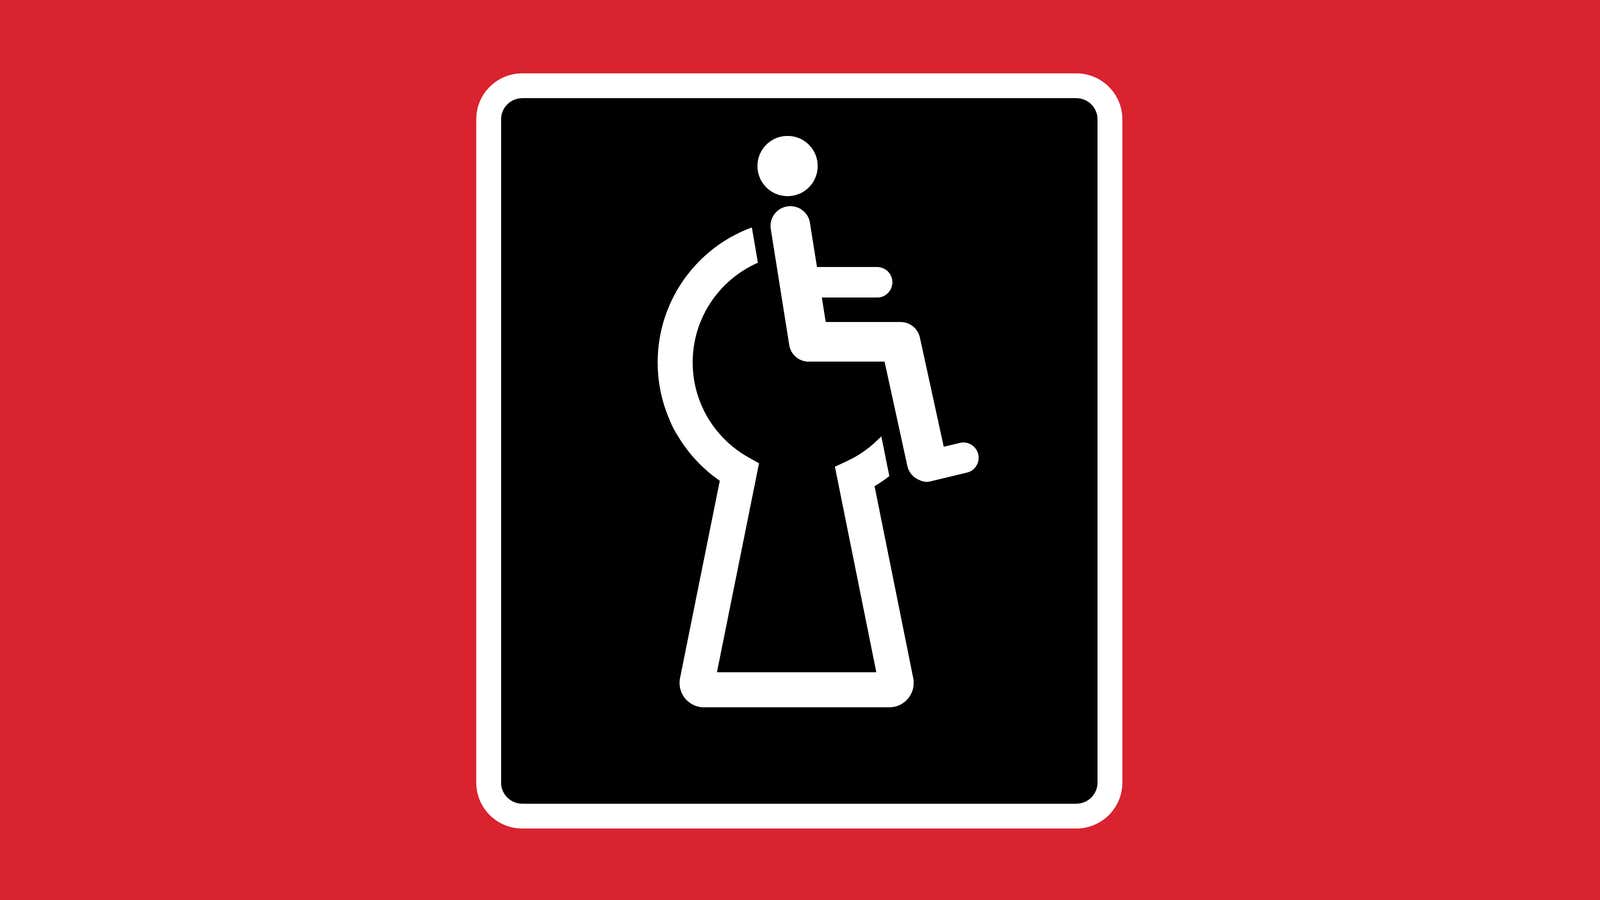 Everyone Should Be Able to Use the Public Restroom: When ADA Is Not Enough